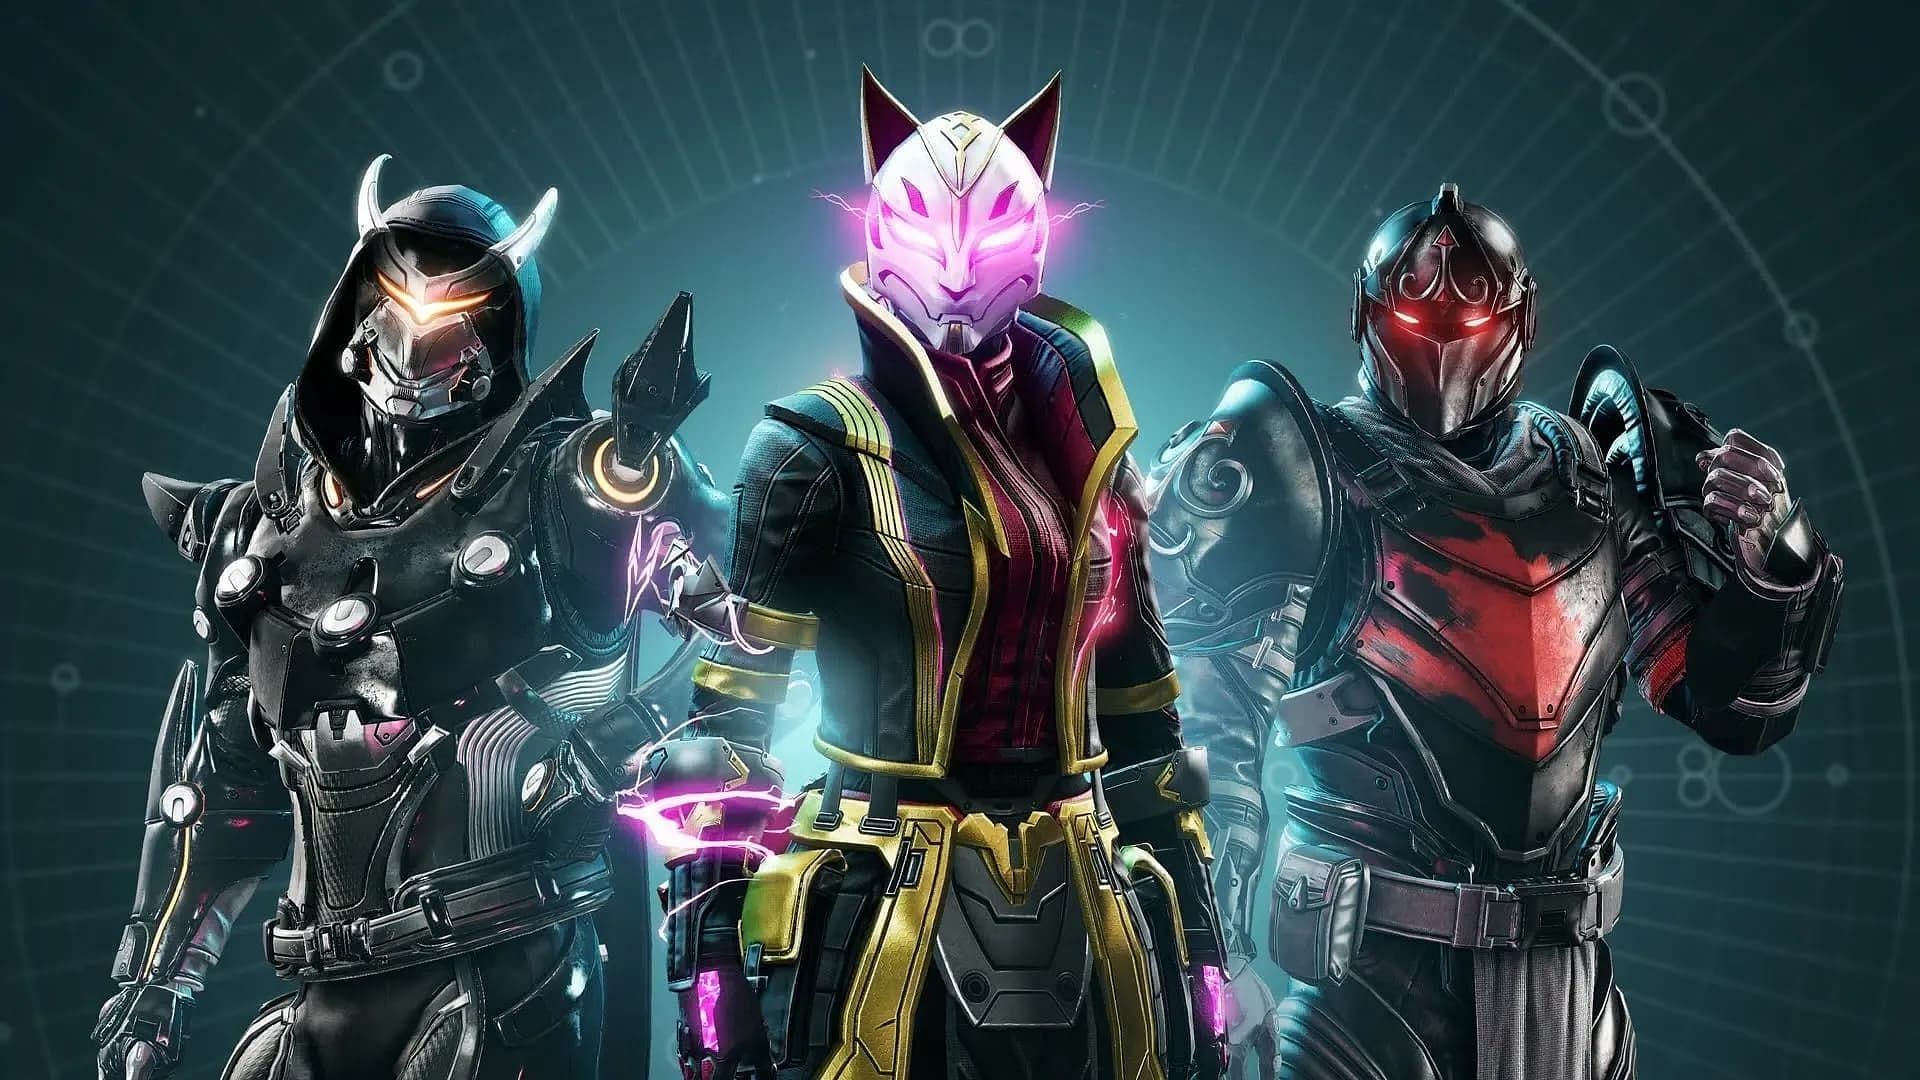 Three prominent Fortnite characters will be seen in Destiny 2 (Image via Bungie/Epic Games)